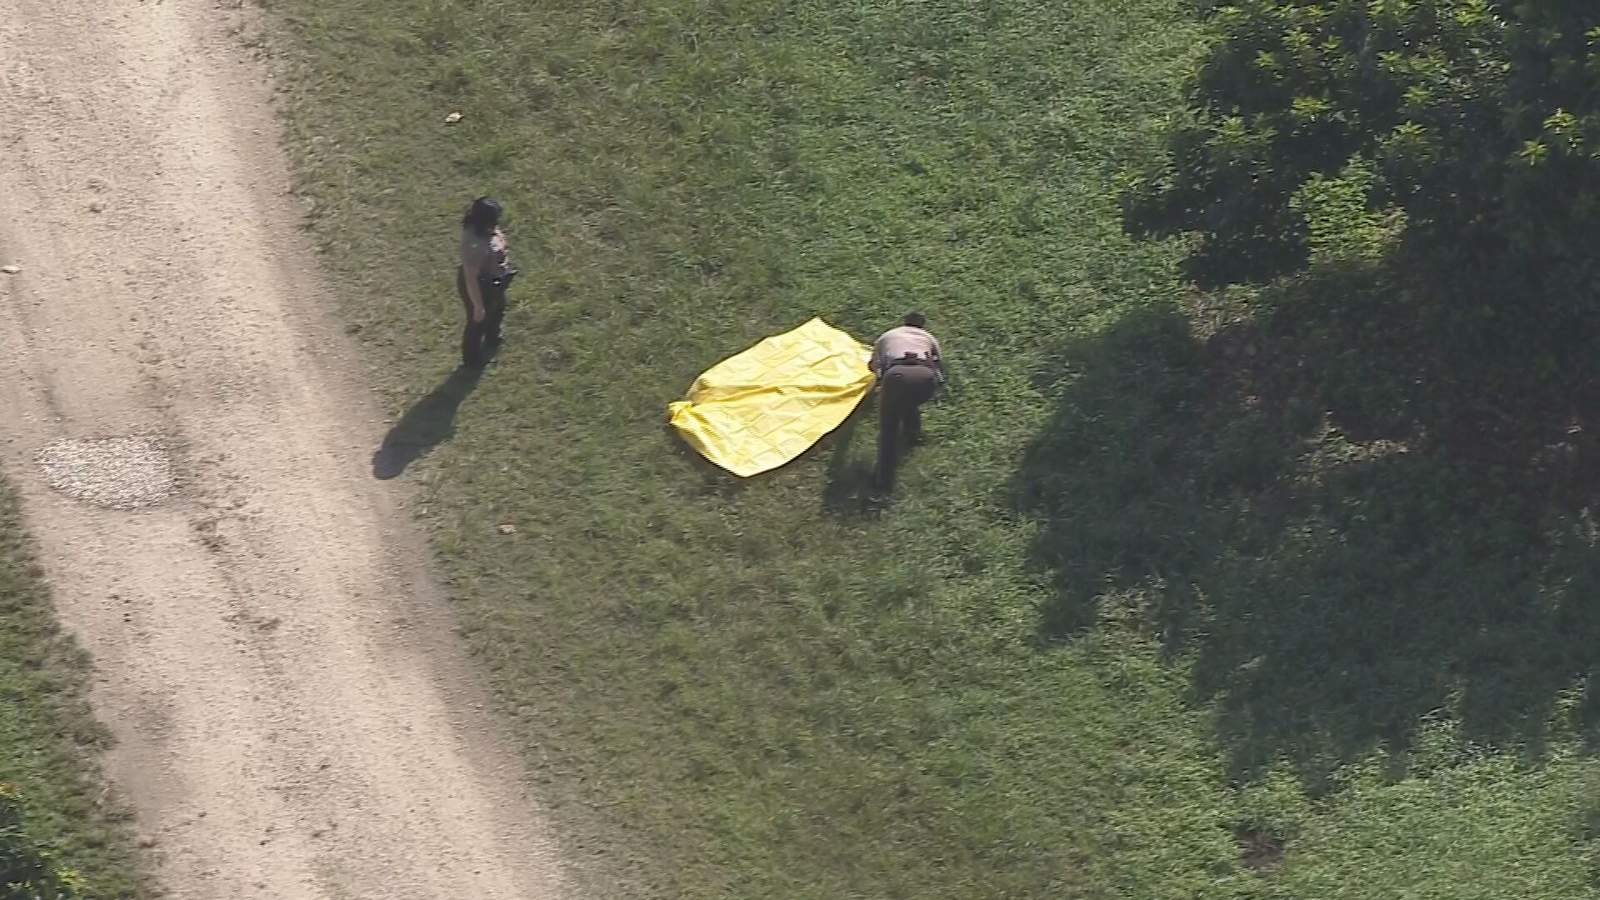 Detectives investigate how a person's body turned up on Monday in an agricultural field in Miami-Dade.